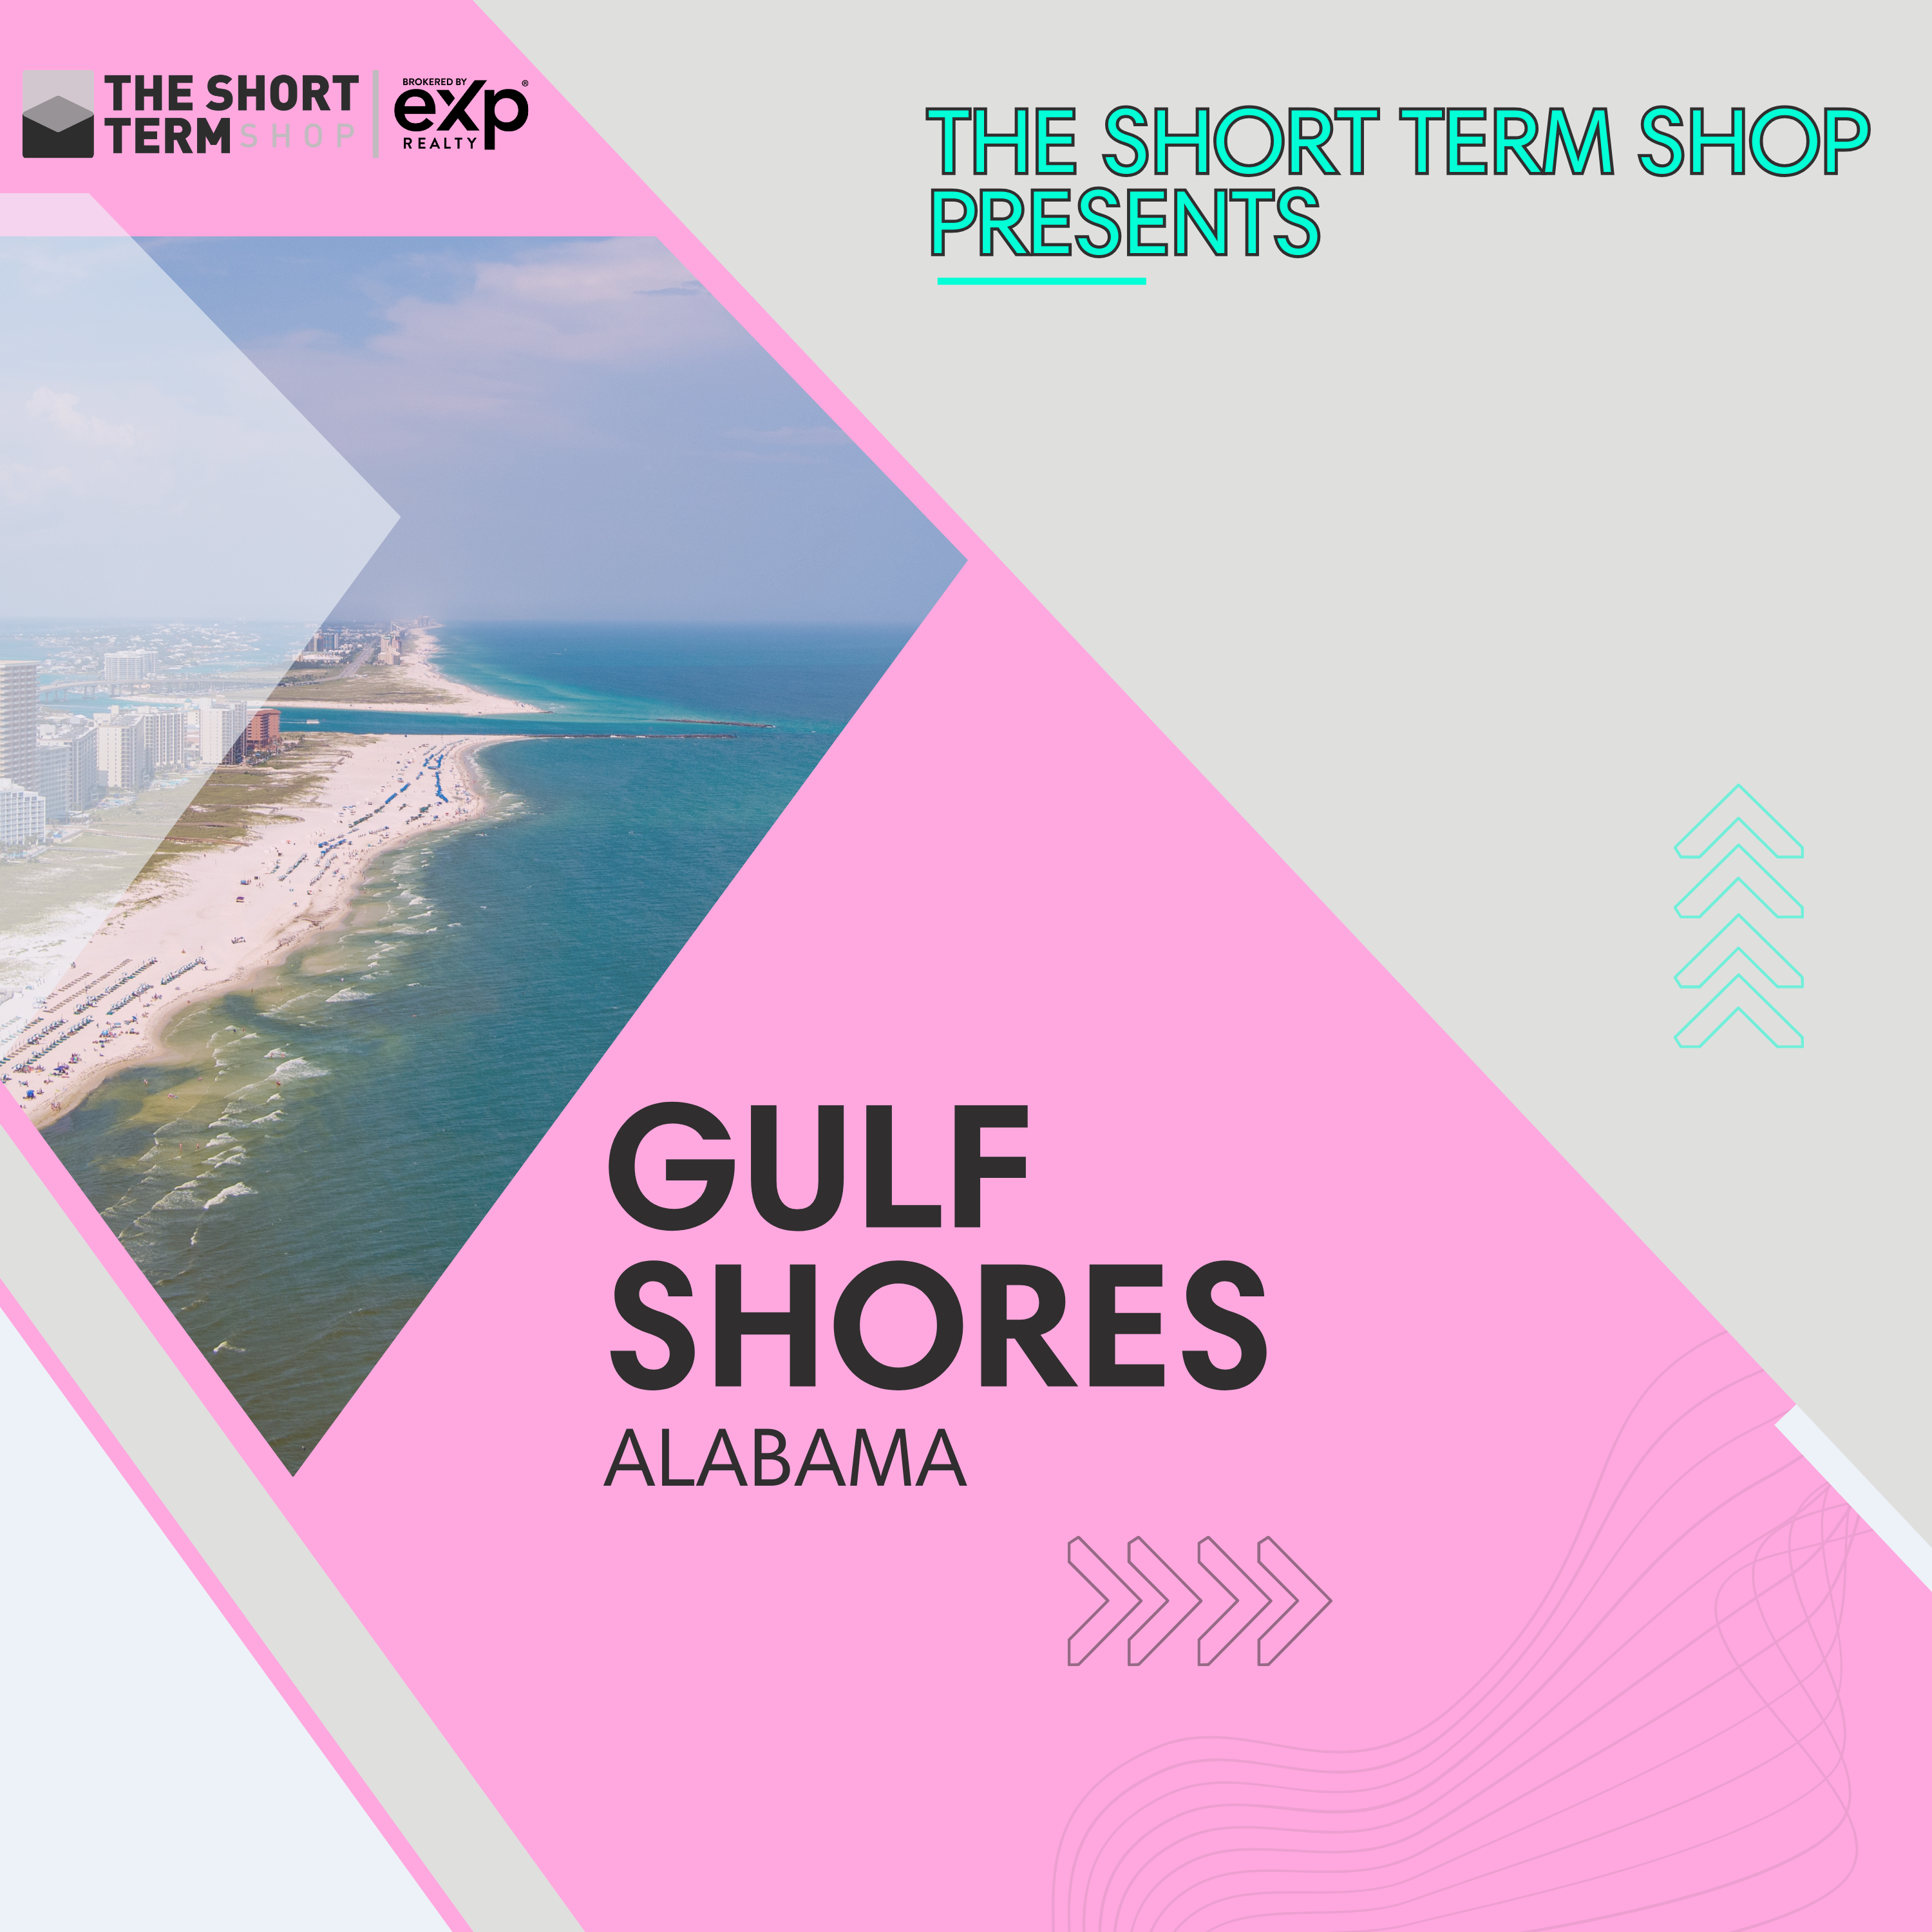 Buying an Airbnb In Gulf Shores, Alabama